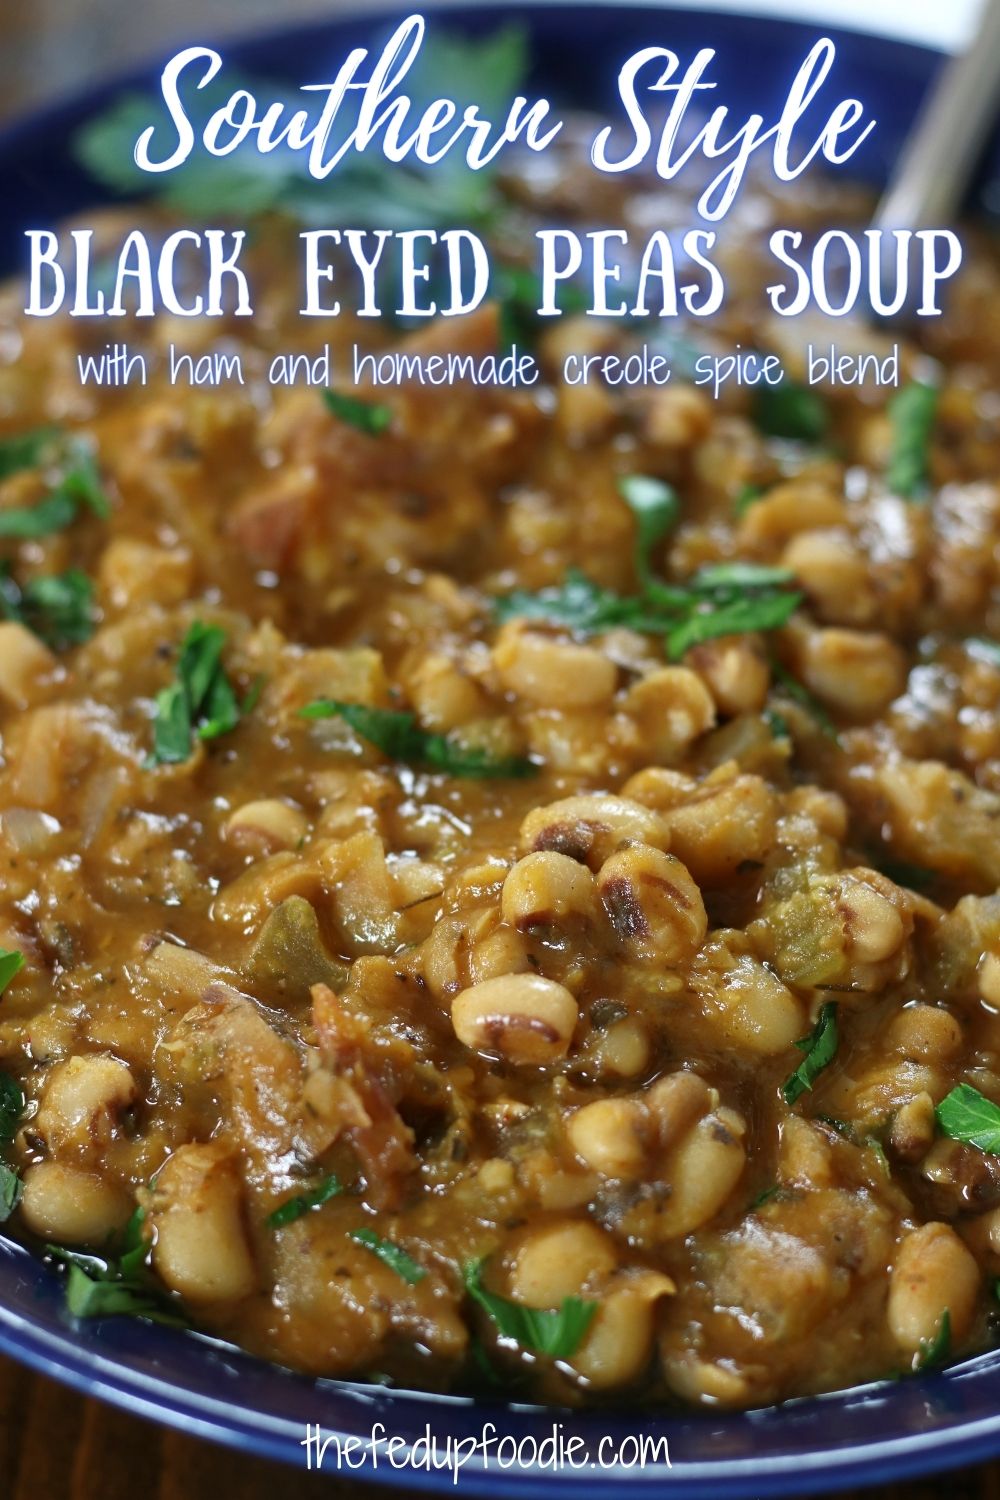 A New Year's tradition, this Black Eyed Pea Soup is incredibly easy to make, healthy and so very delicious. Serve over brown rice with my Old Fashioned Cornbread for a Southern soul food way to ring in the year. 
#BlackEyedPeasRecipe #BlackEyedPeas #BlackEyedPeaSoup #BlackEyedPeaSoupWithHam #BlackEyedPeaSoupWithHamHock #SouthernBlackEyedPeasSoulFood